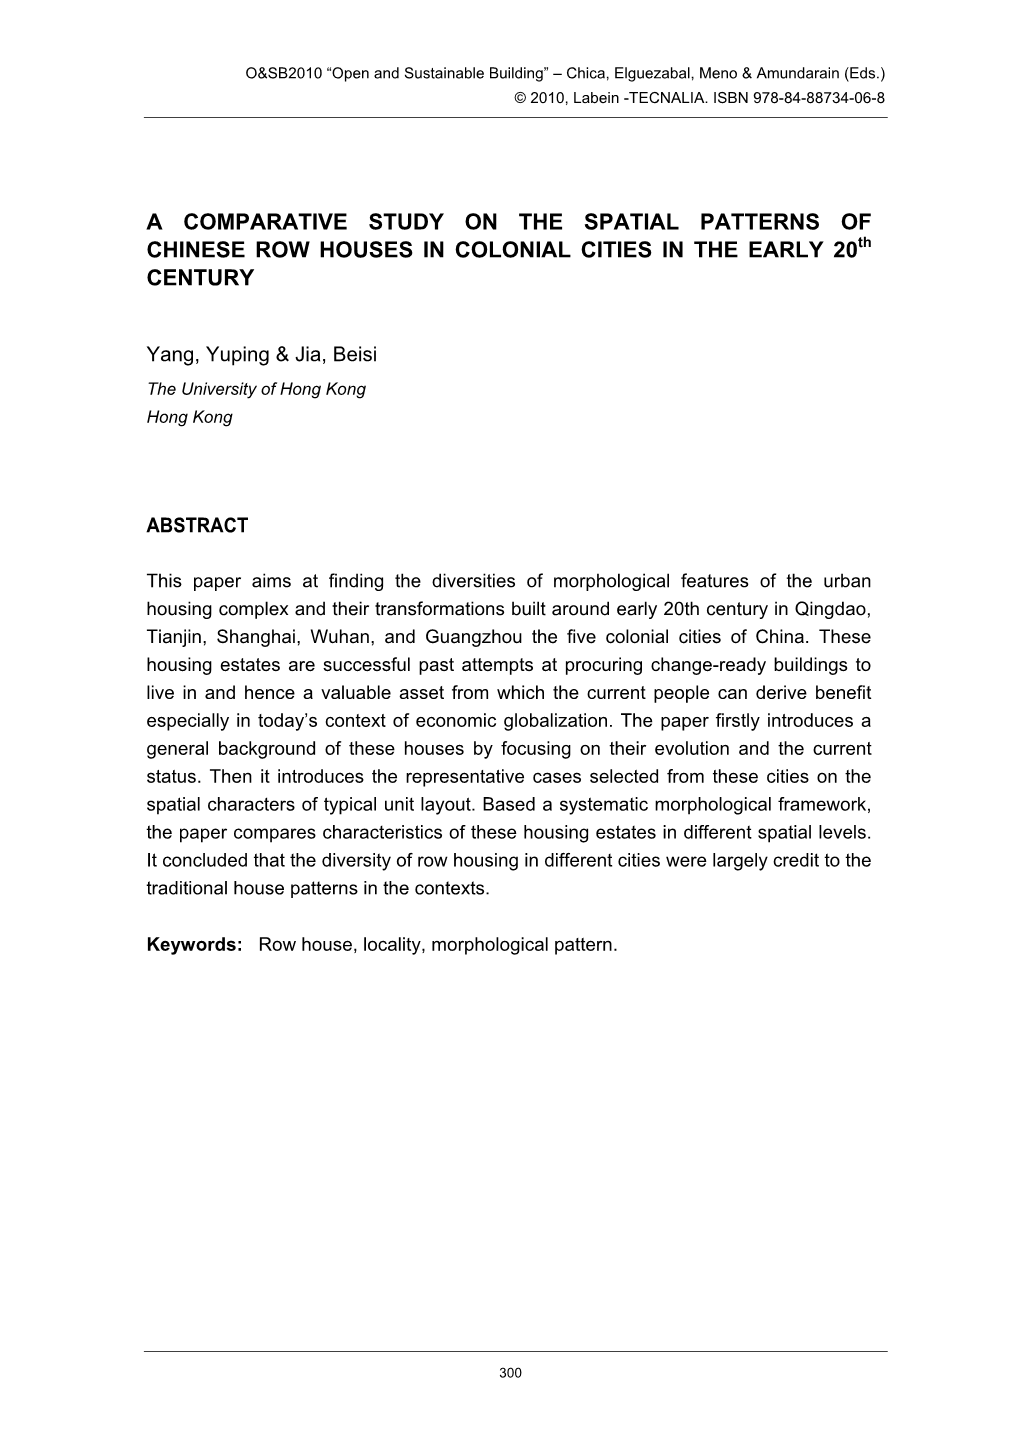 A COMPARATIVE STUDY on the SPATIAL PATTERNS of CHINESE ROW HOUSES in COLONIAL CITIES in the EARLY 20Th CENTURY